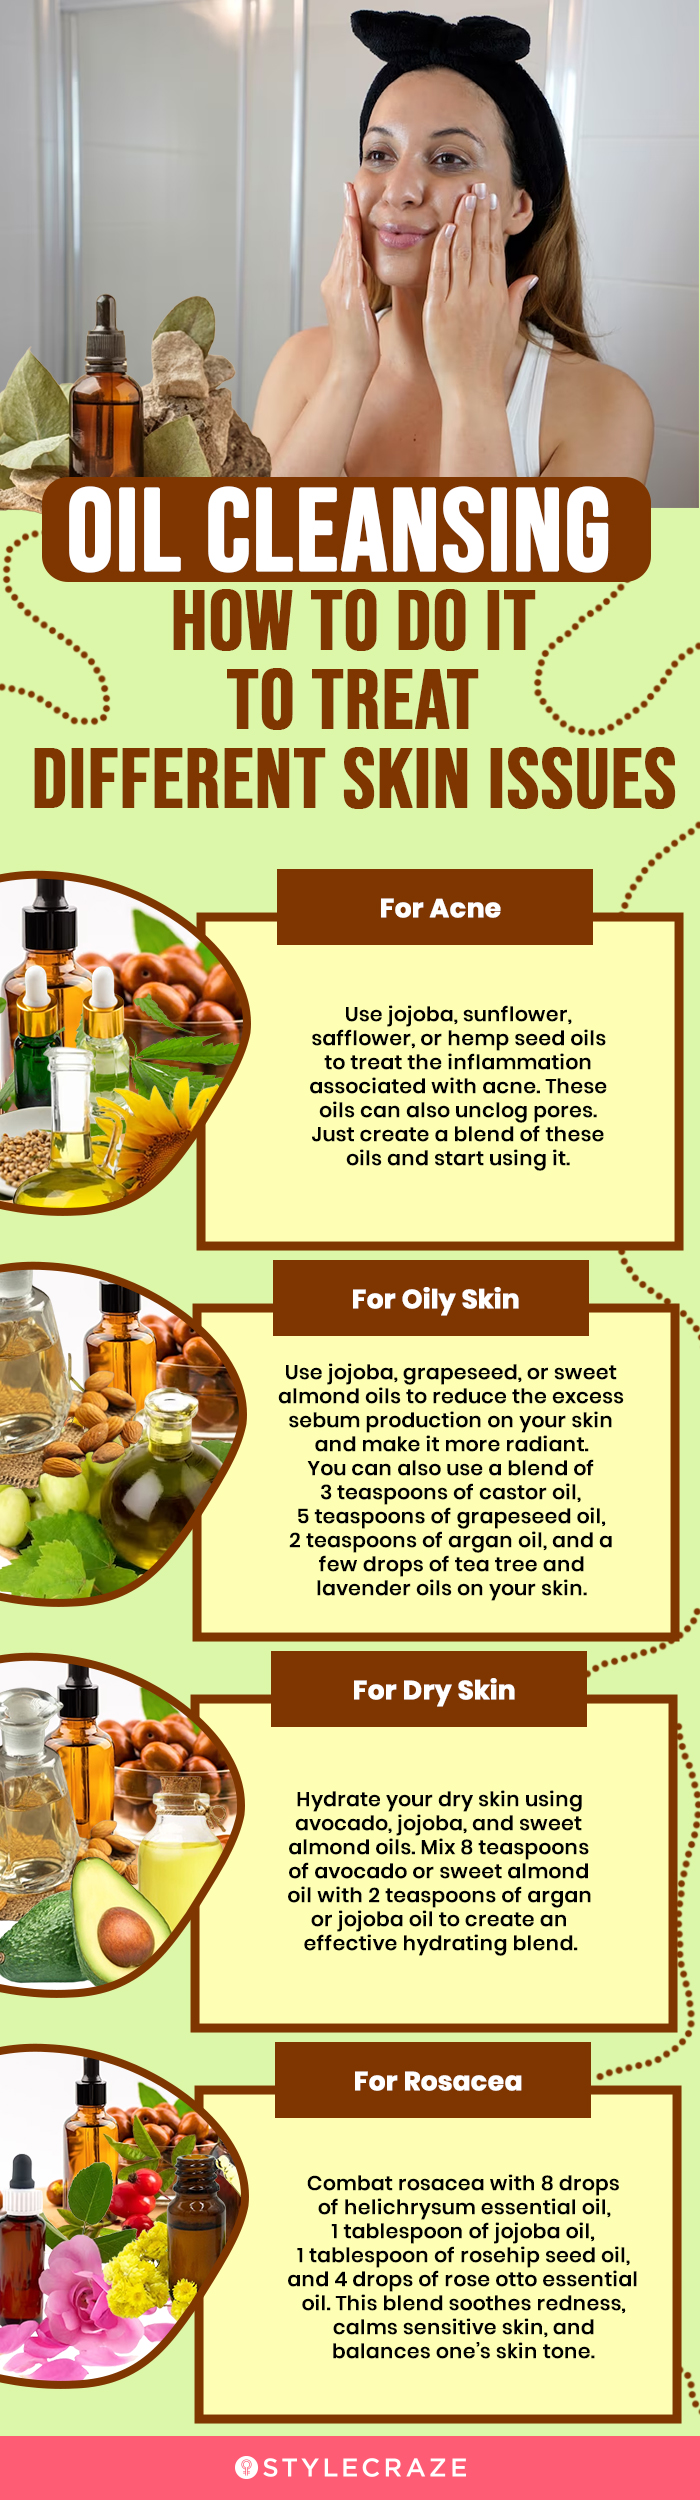 oil cleansing how to do it to treat different skin issues (infographic)